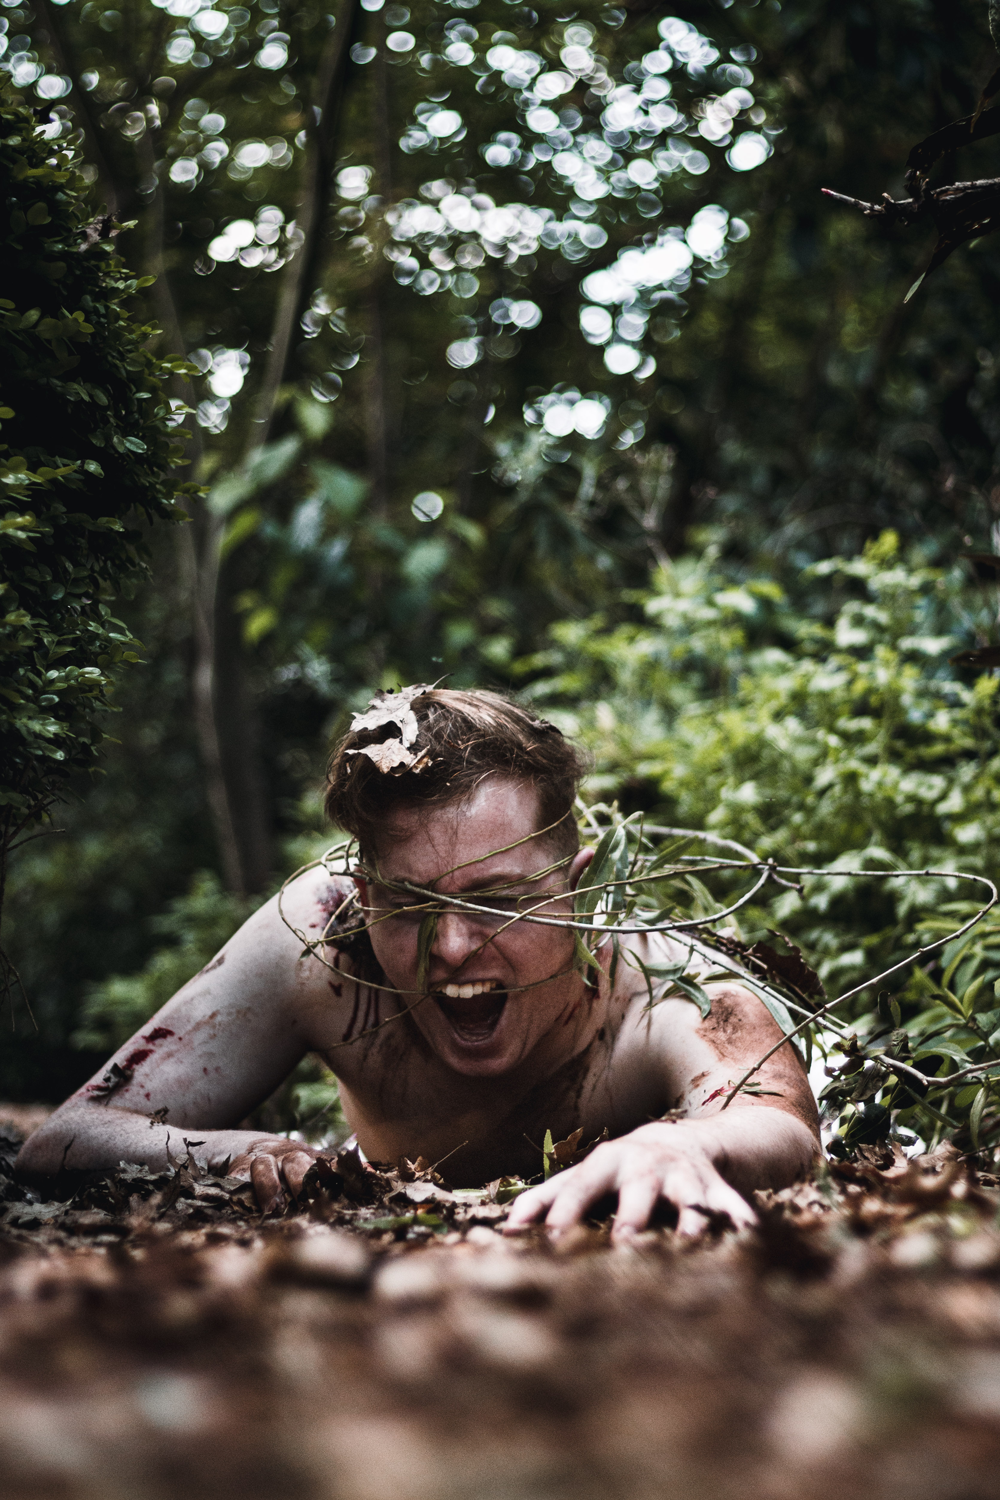 Colour photograph of a man crawling and trapped on ground in vines amongst forest scenery.